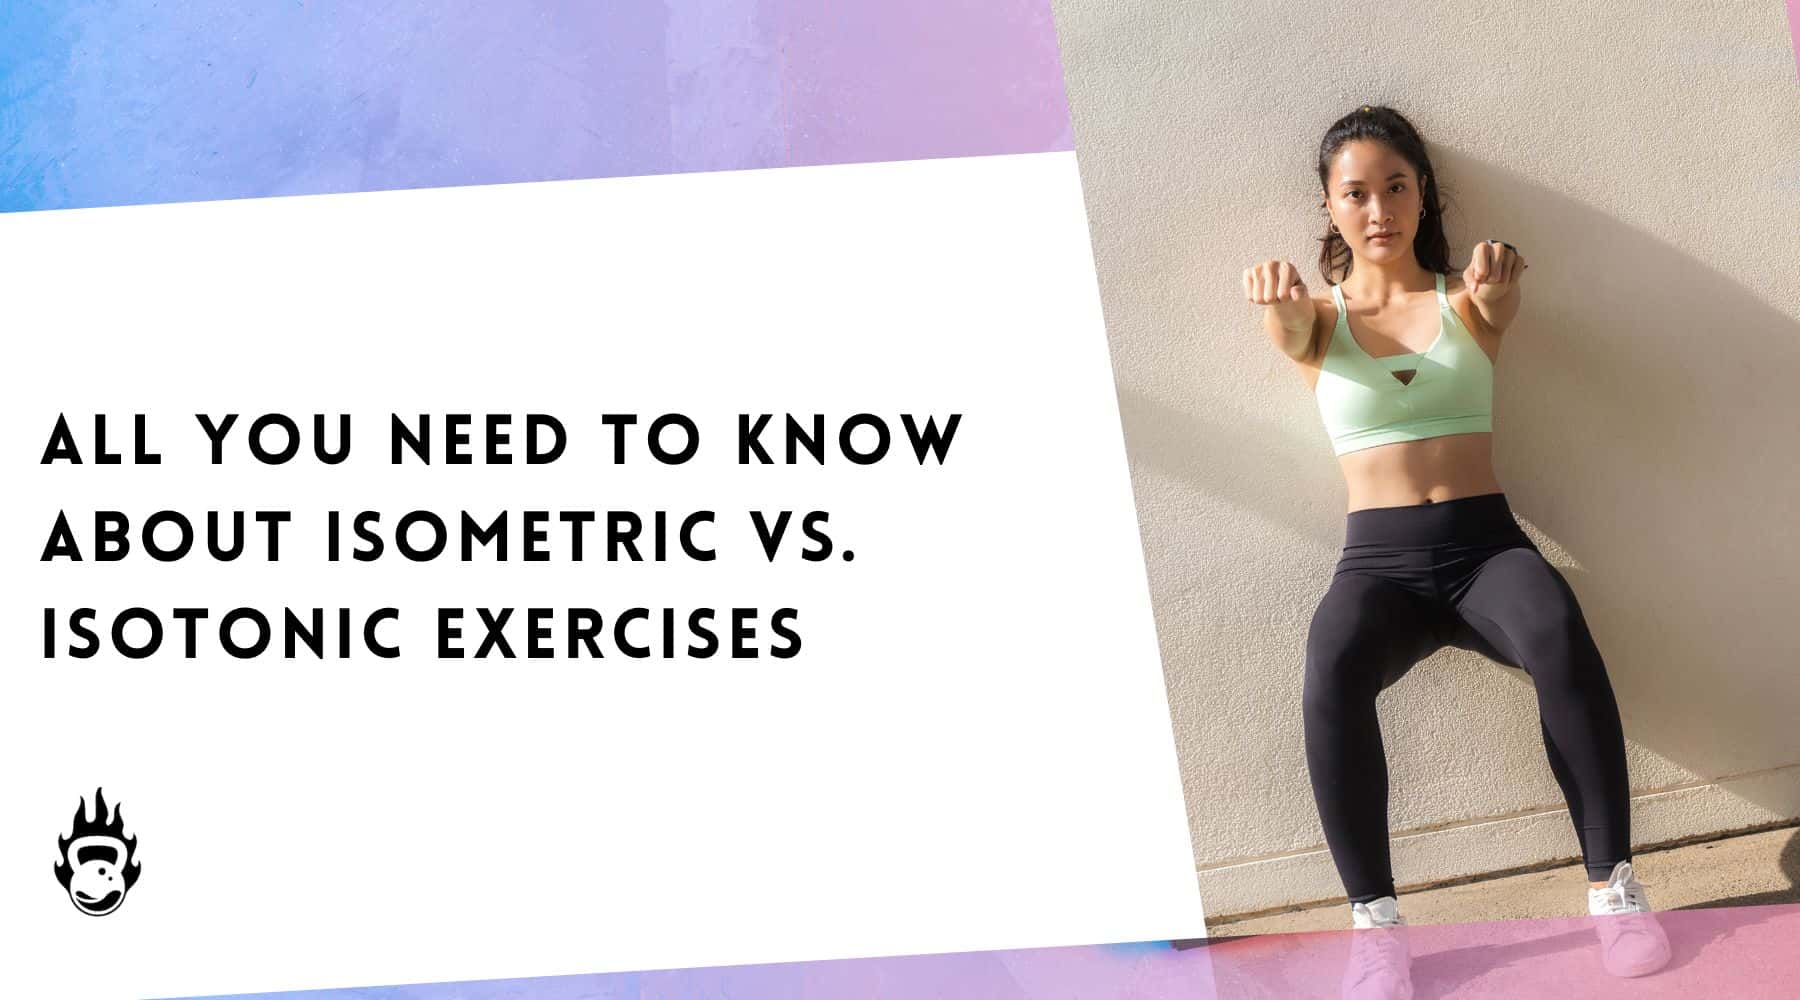 All You Need To Know About Isometric vs Isotonic Exercises